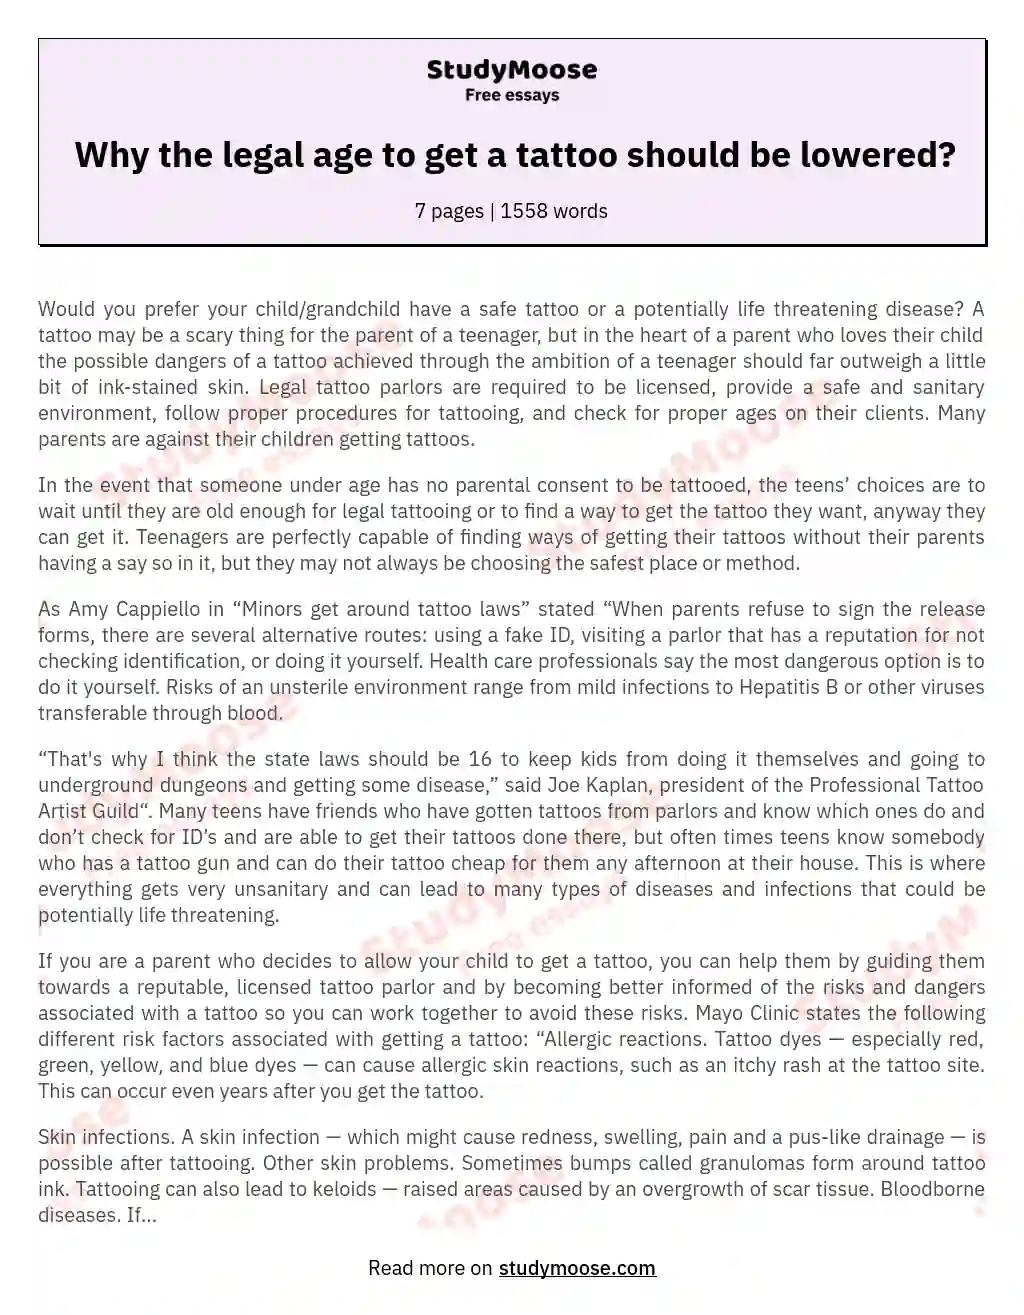 Why the legal age to get a tattoo should be lowered?